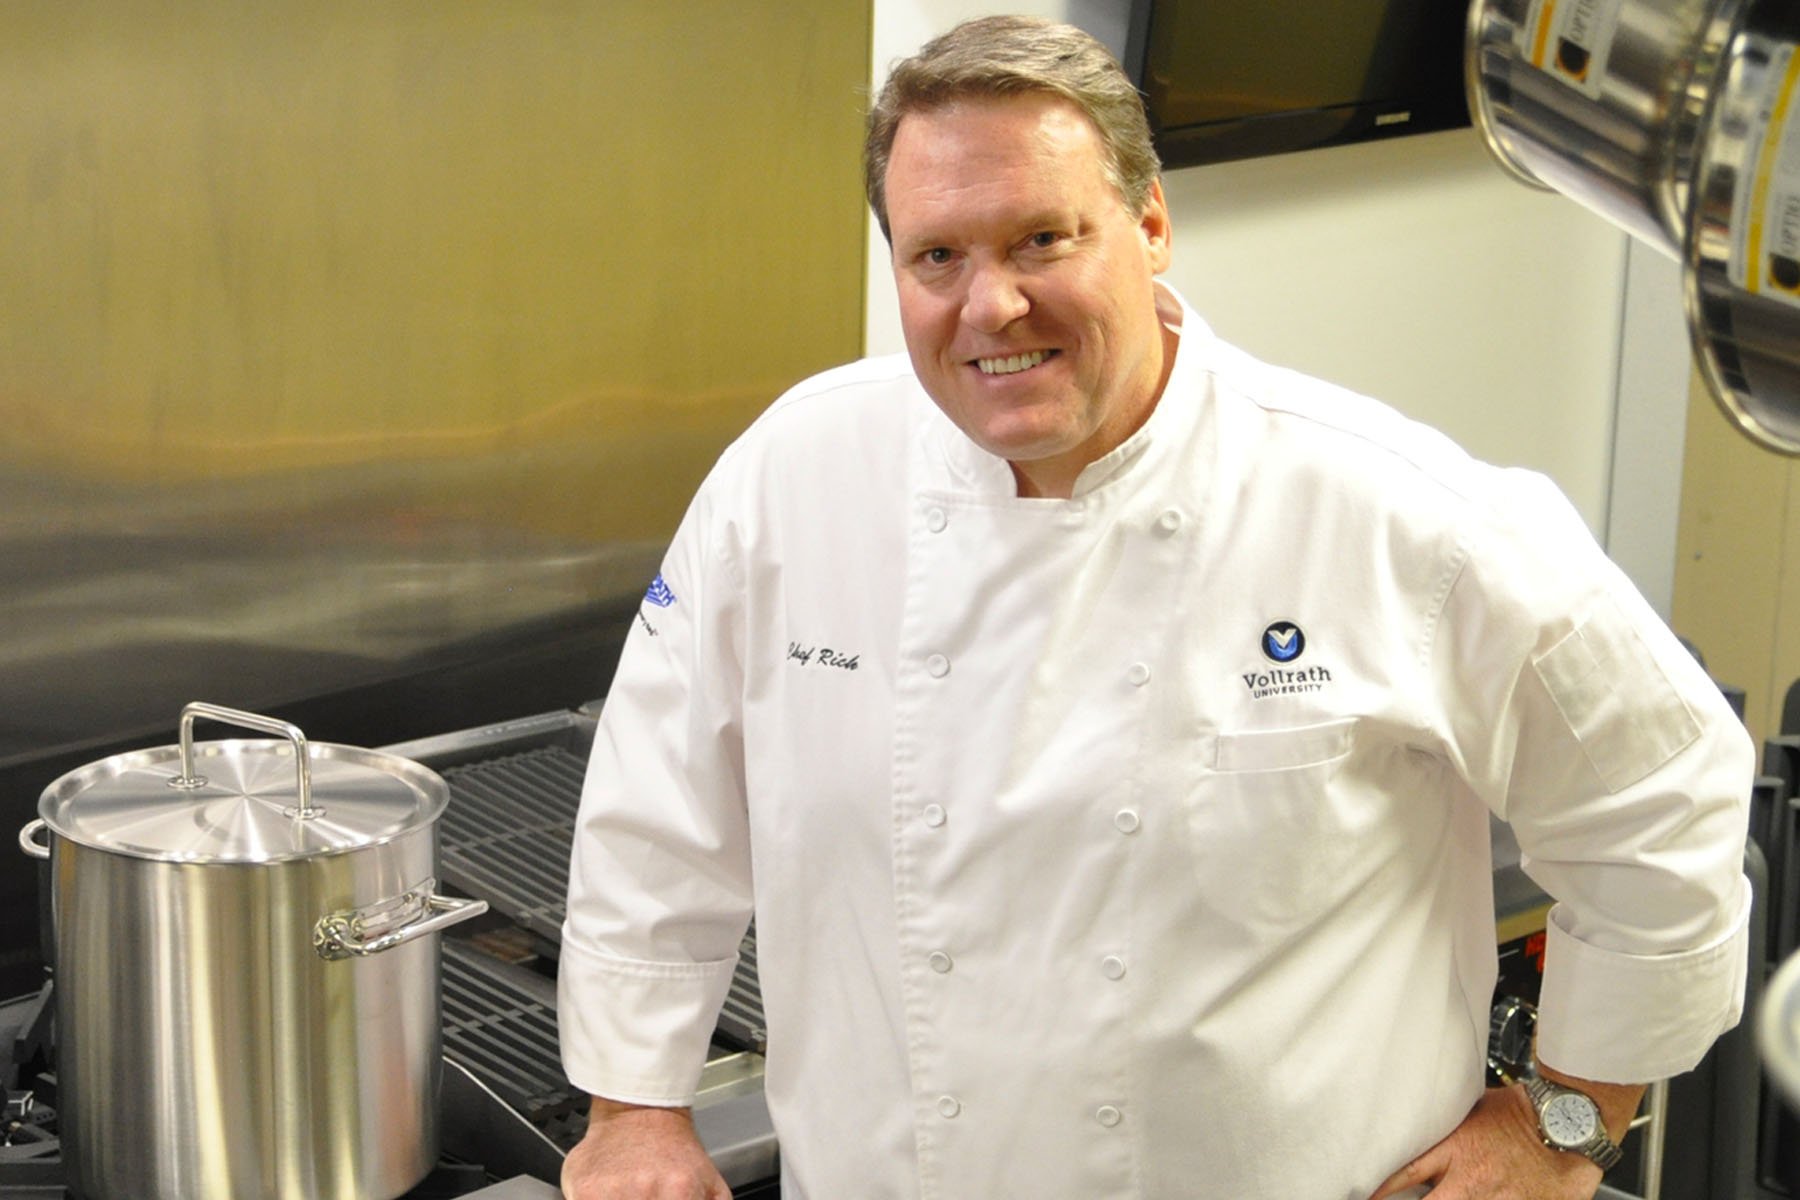 Chef Richard Rupp in the kitchen with a pot on a stove next to him